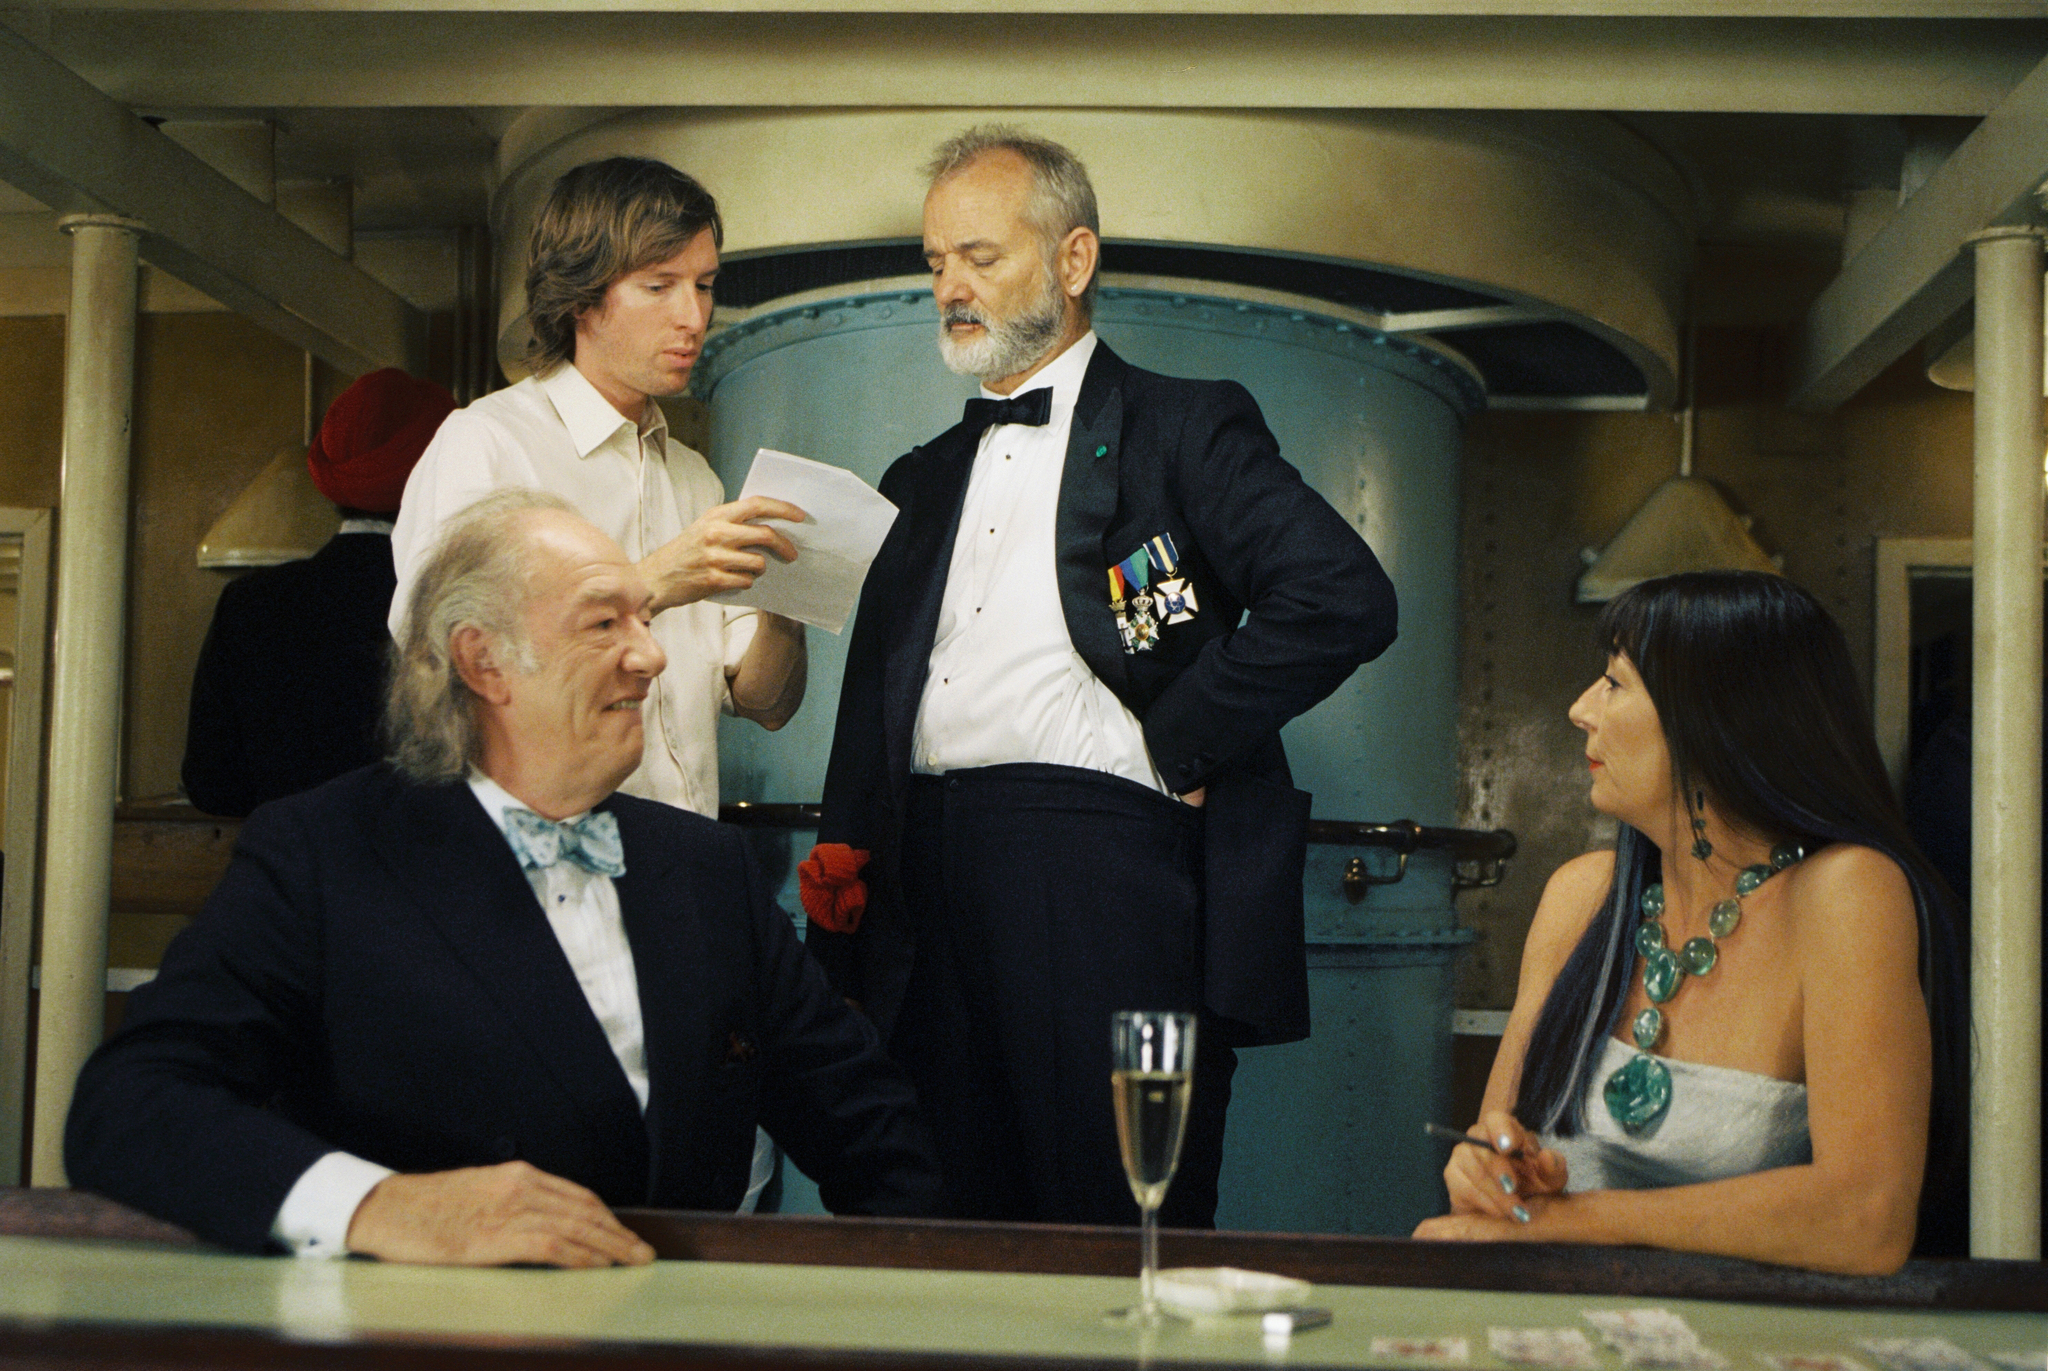 Still of Bill Murray, Anjelica Huston, Michael Gambon and Wes Anderson in The Life Aquatic with Steve Zissou (2004)